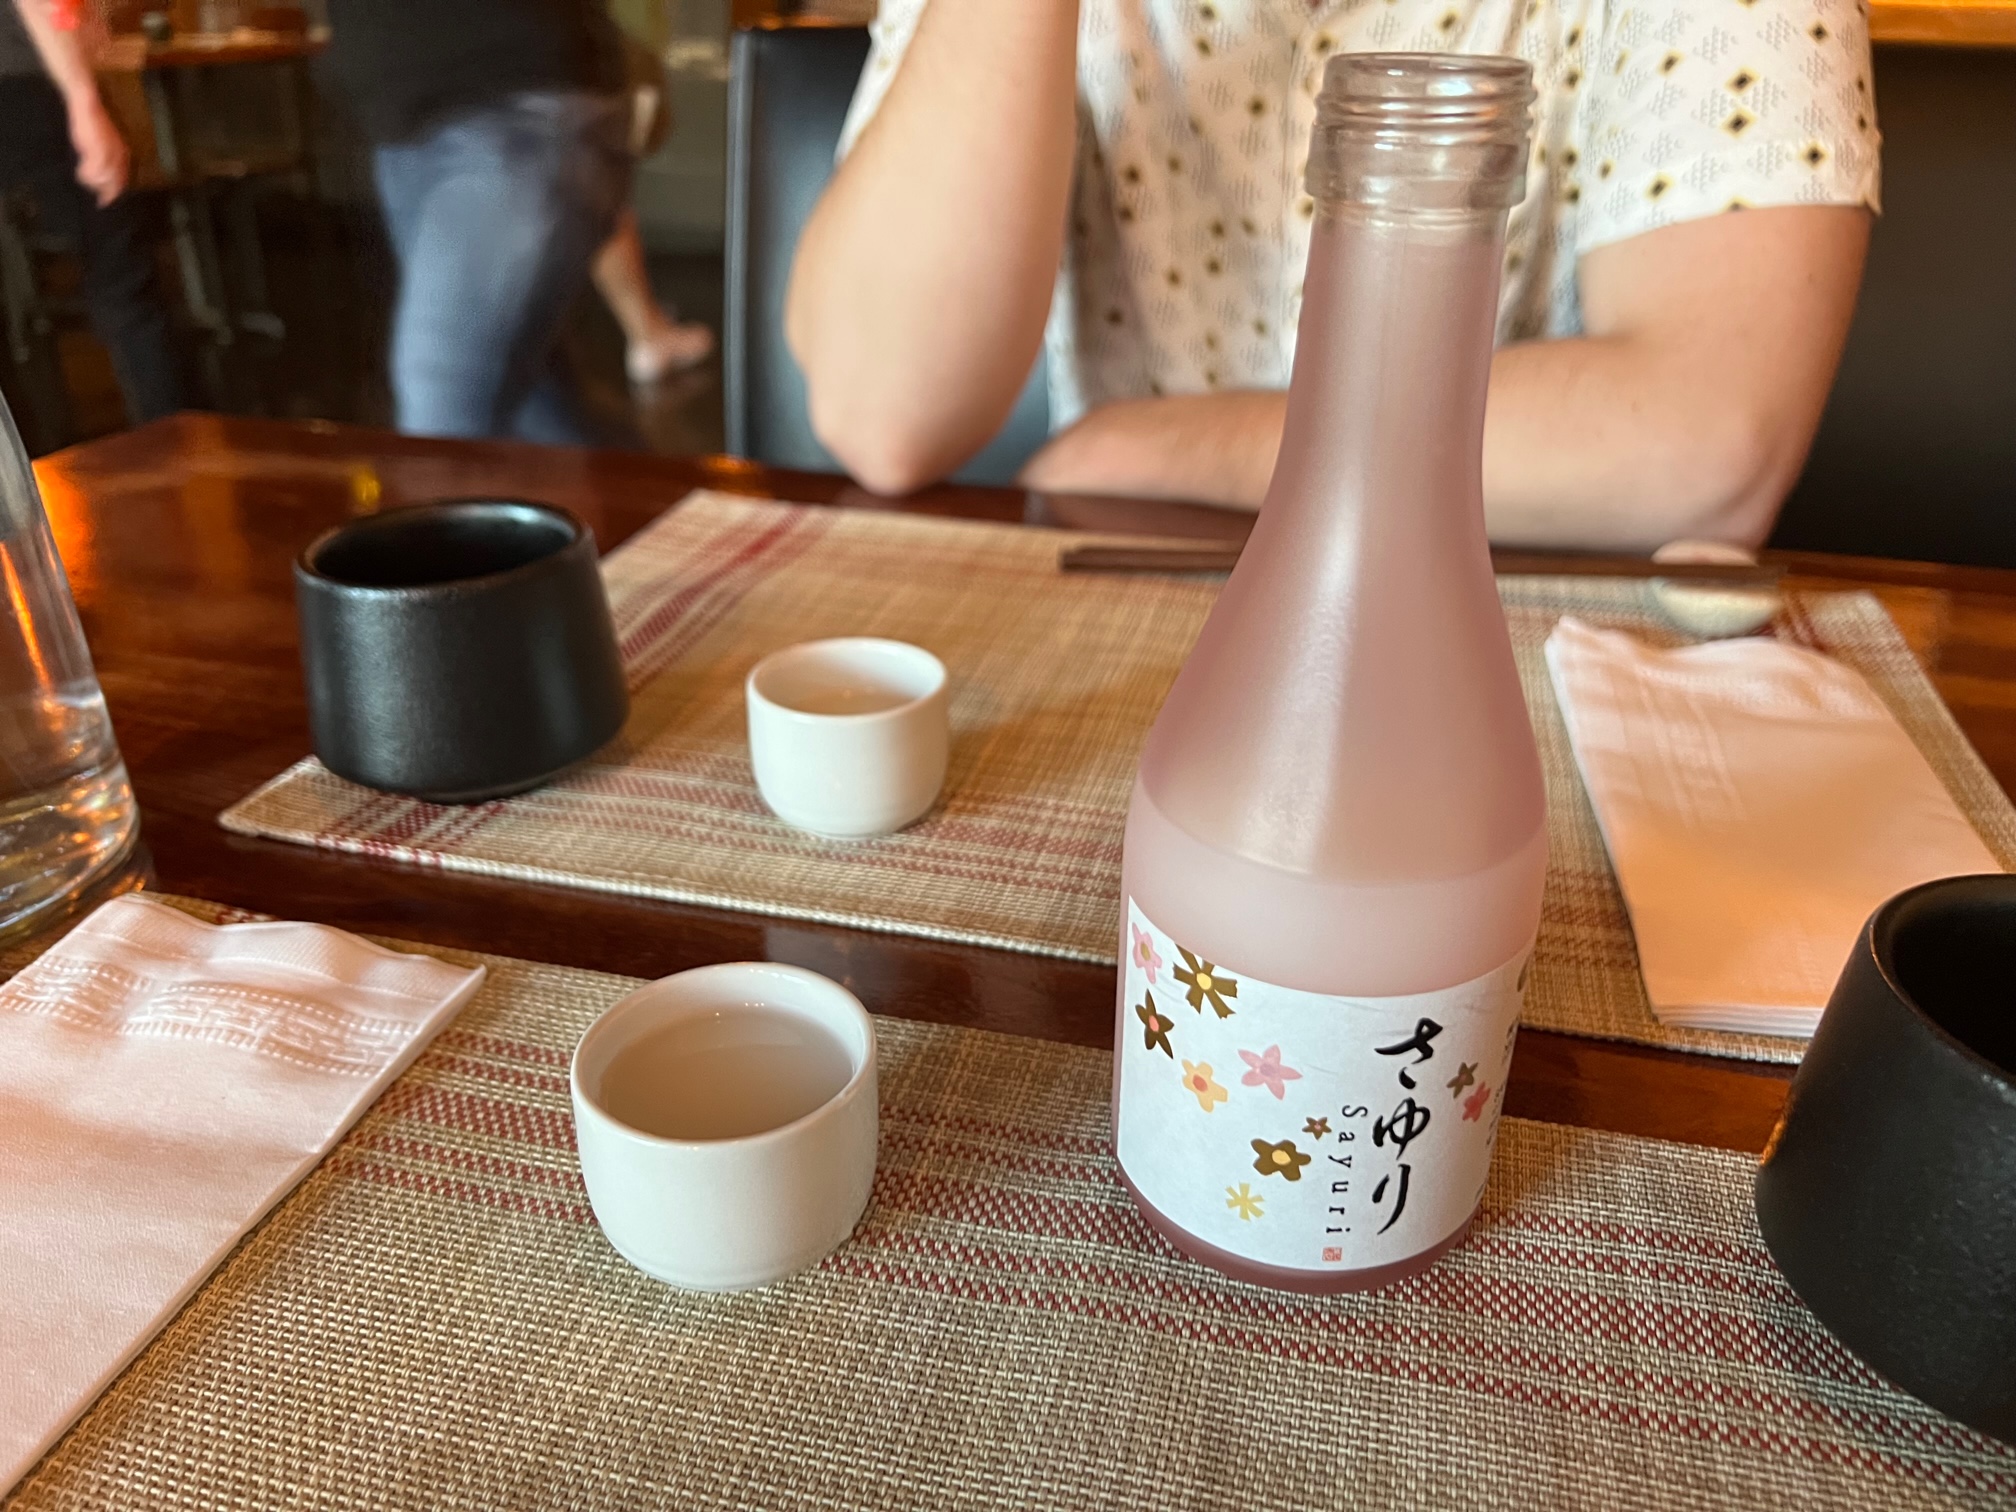 A bottle of chilled Sayuri pink sake sits on a tablemat beside a white sake cup. The author's husband is across the table and just his shirt and arm are visible behind his white cup of sake. Photo by Alyssa Buckley.